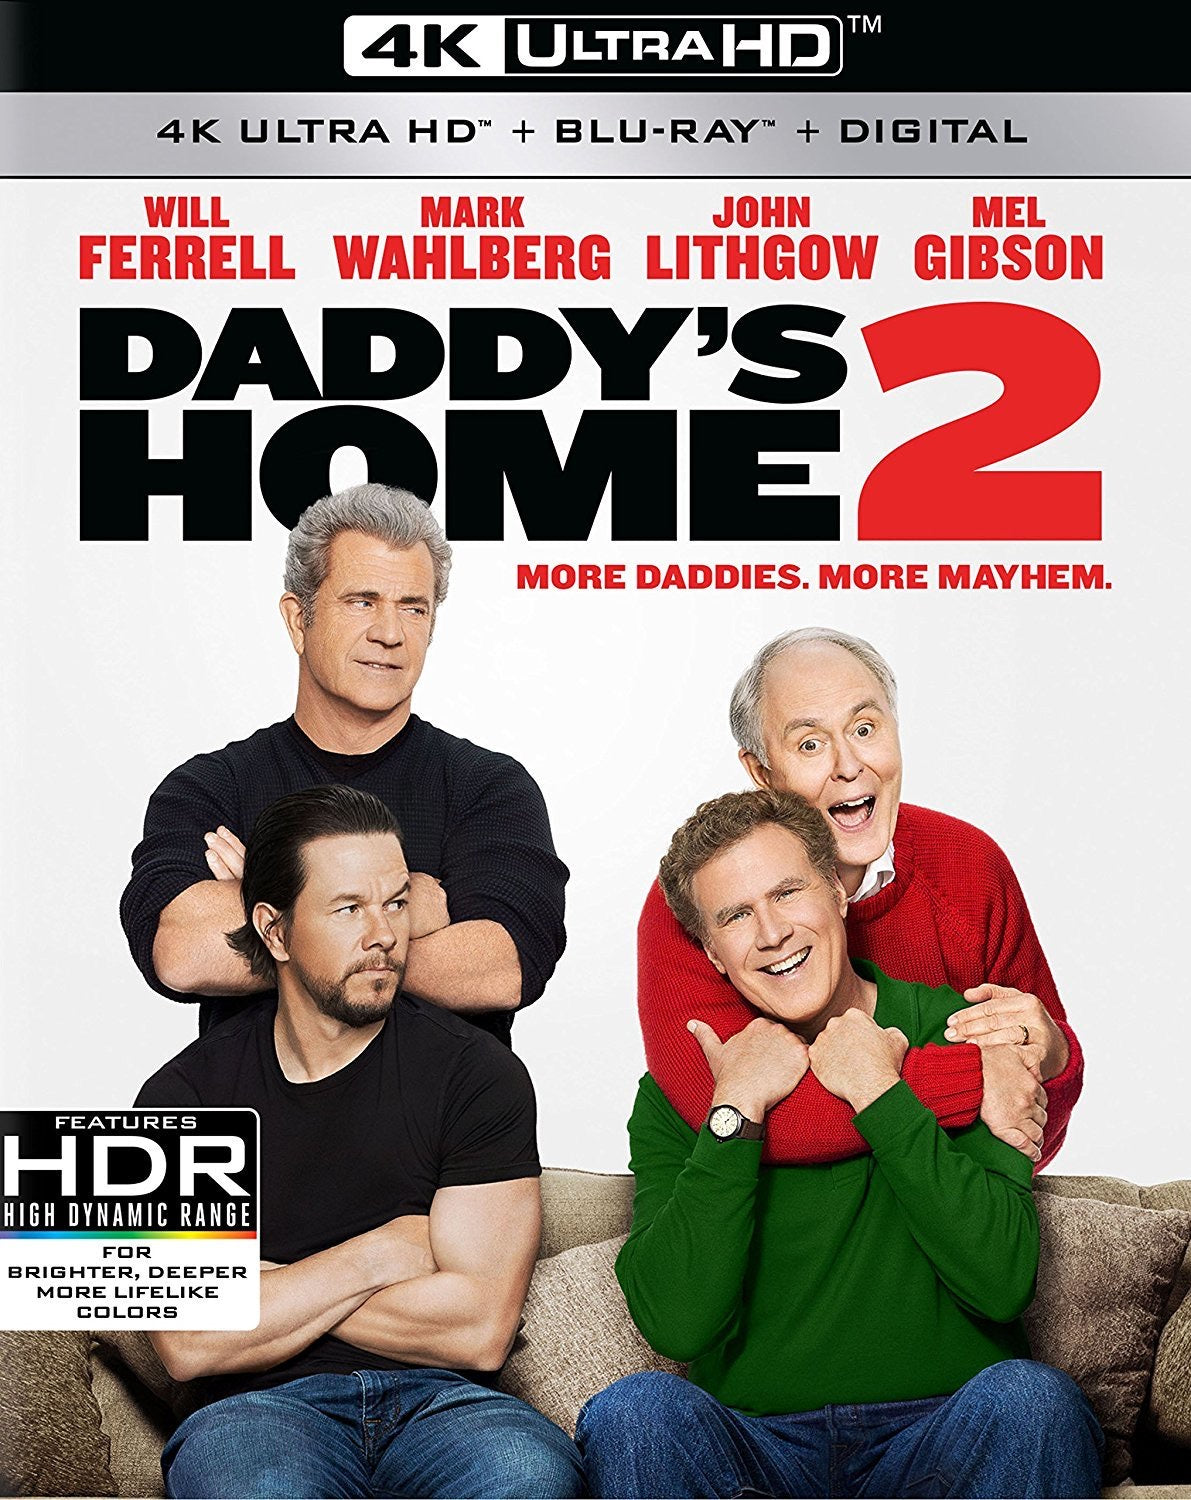 Daddy’s Home 2 (2017) iTunes 4K redemption only